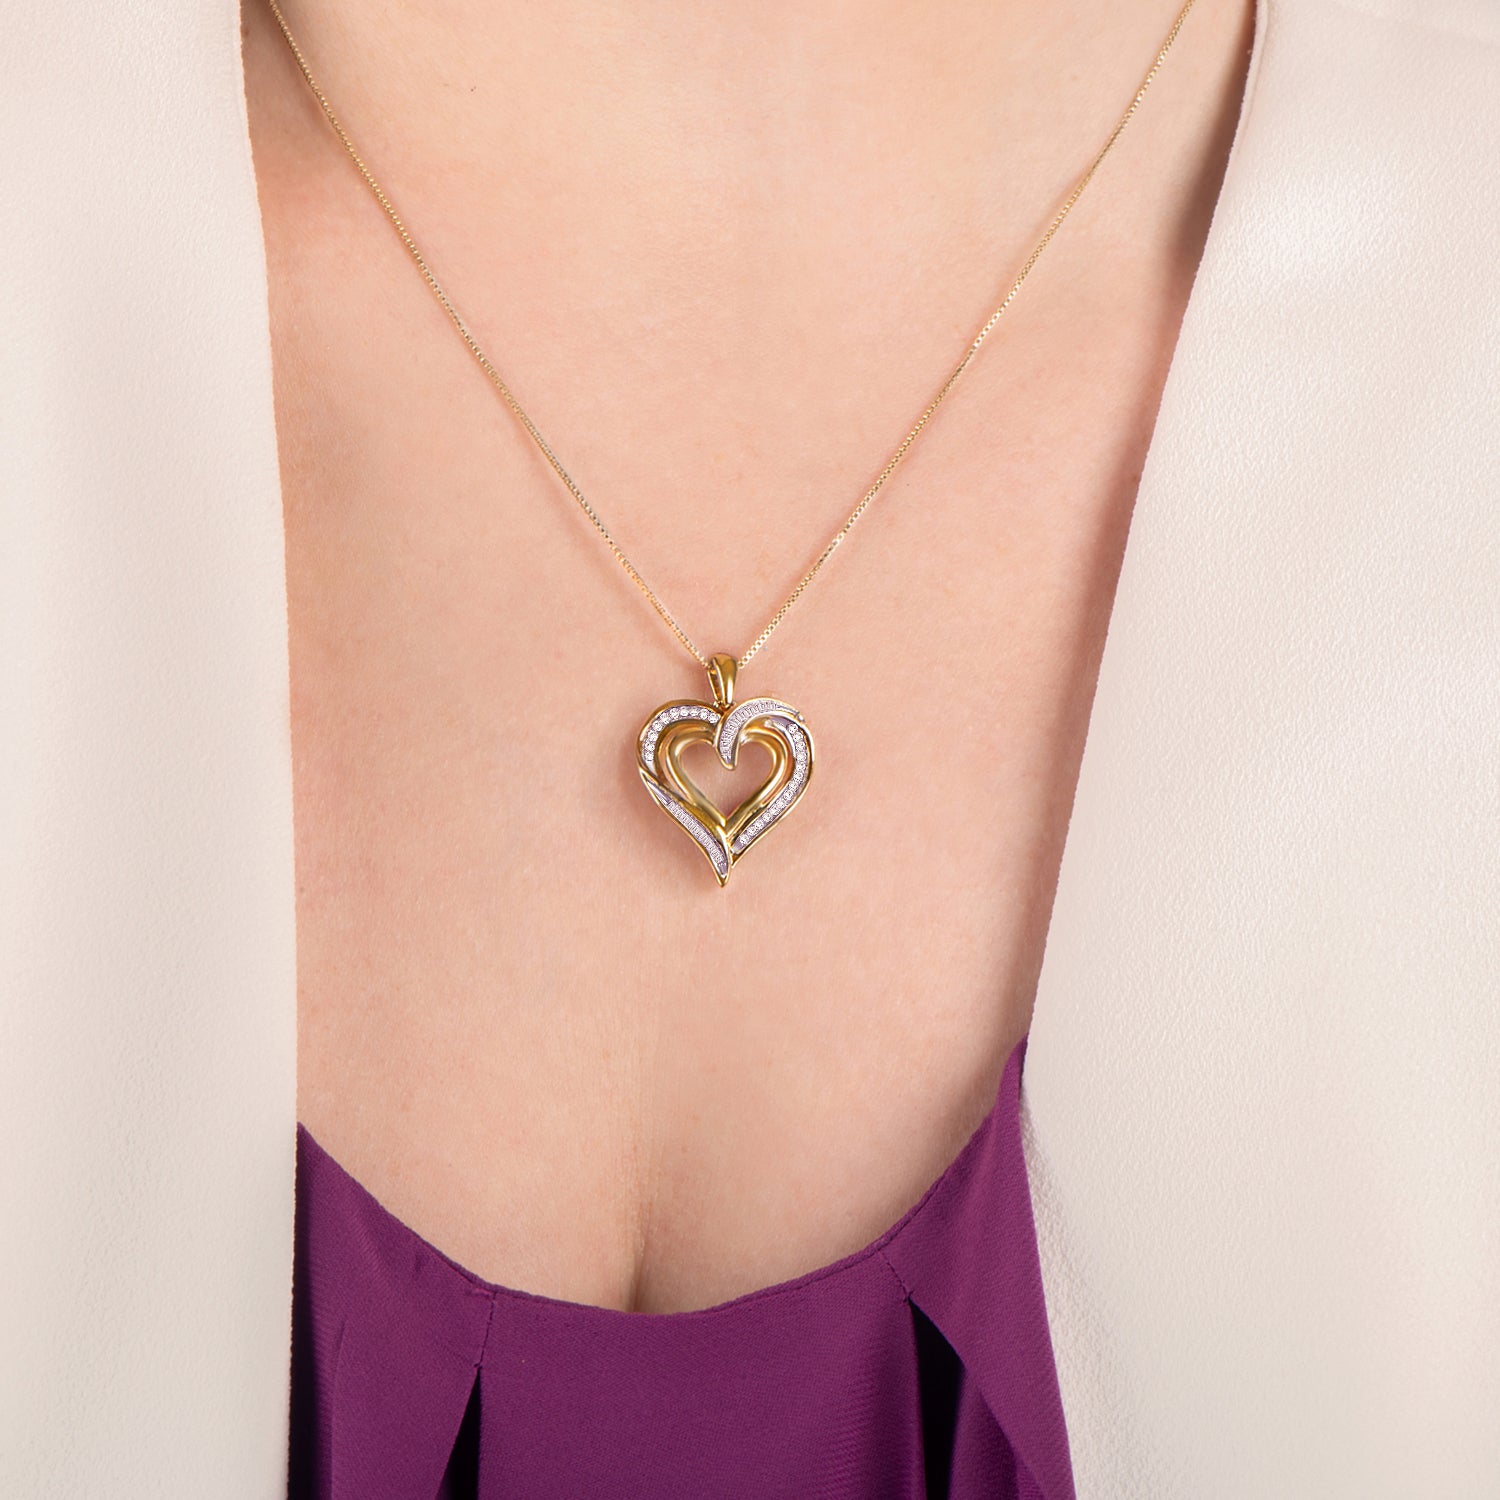 Ashes Pendant - The Chic - LOVE IN A JEWEL®